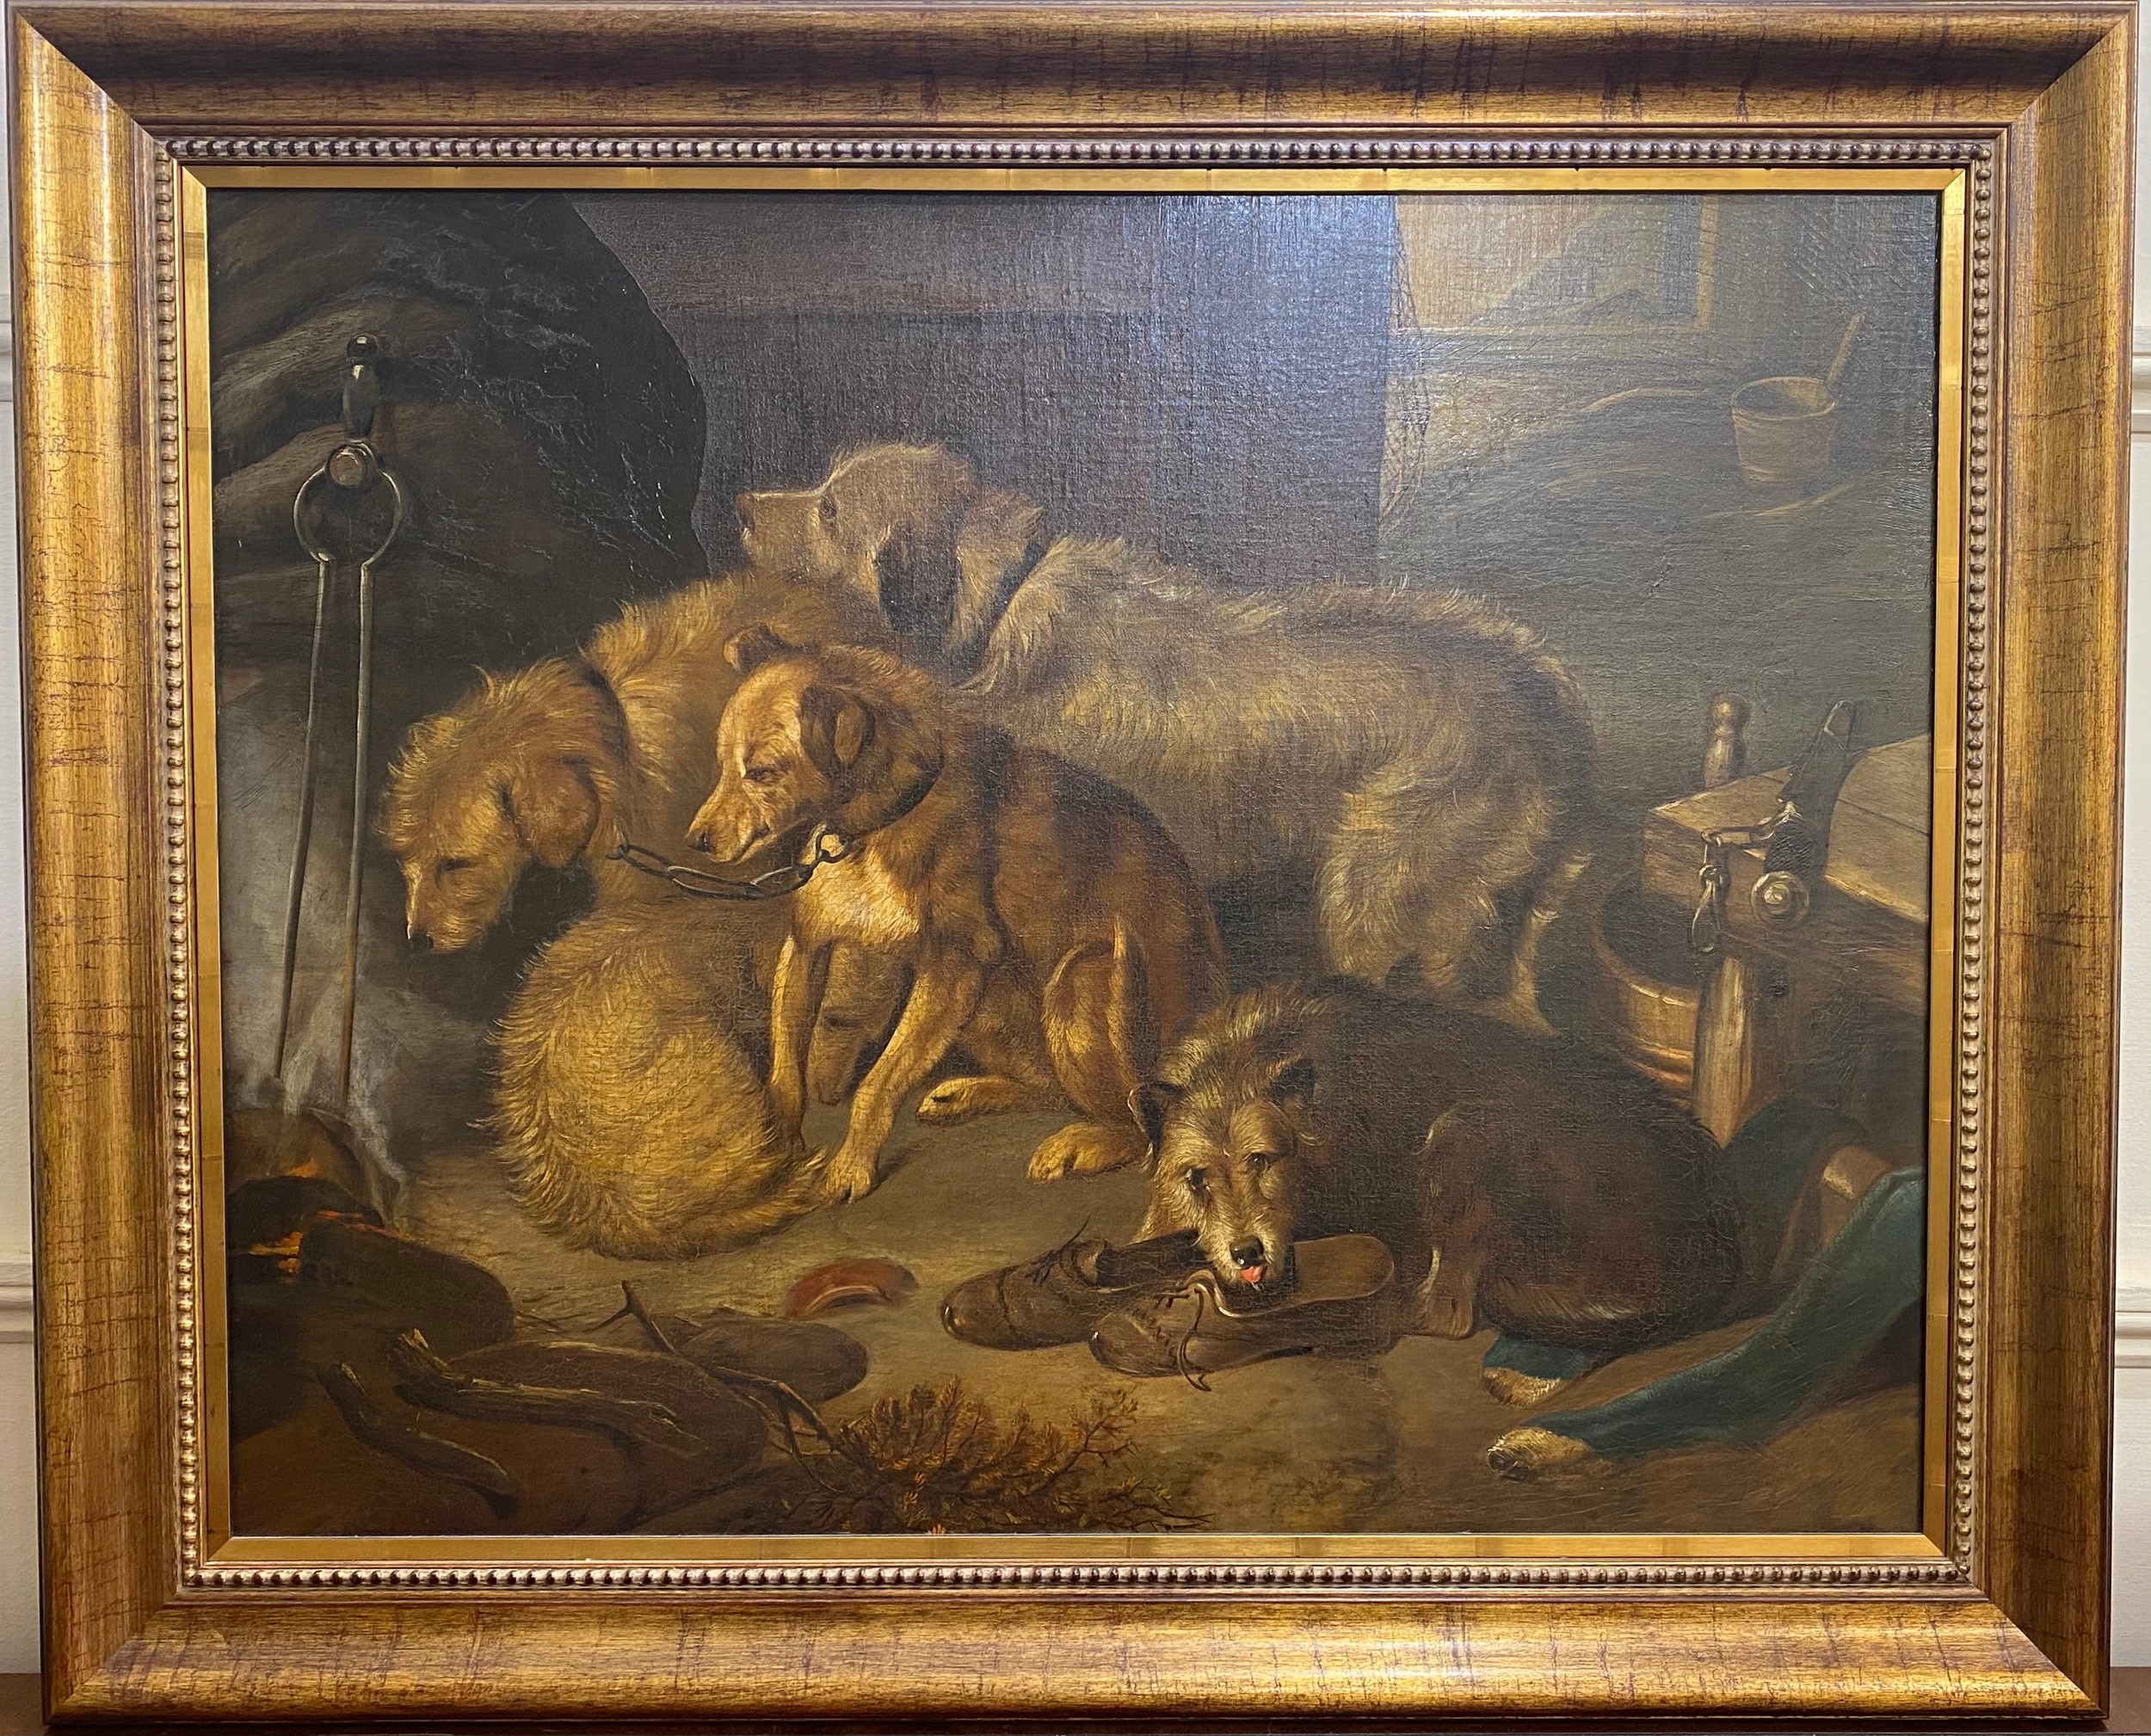 After Edwin Landseer, ‘A Fireside Party’ late 19th/early 20th century painting of five various